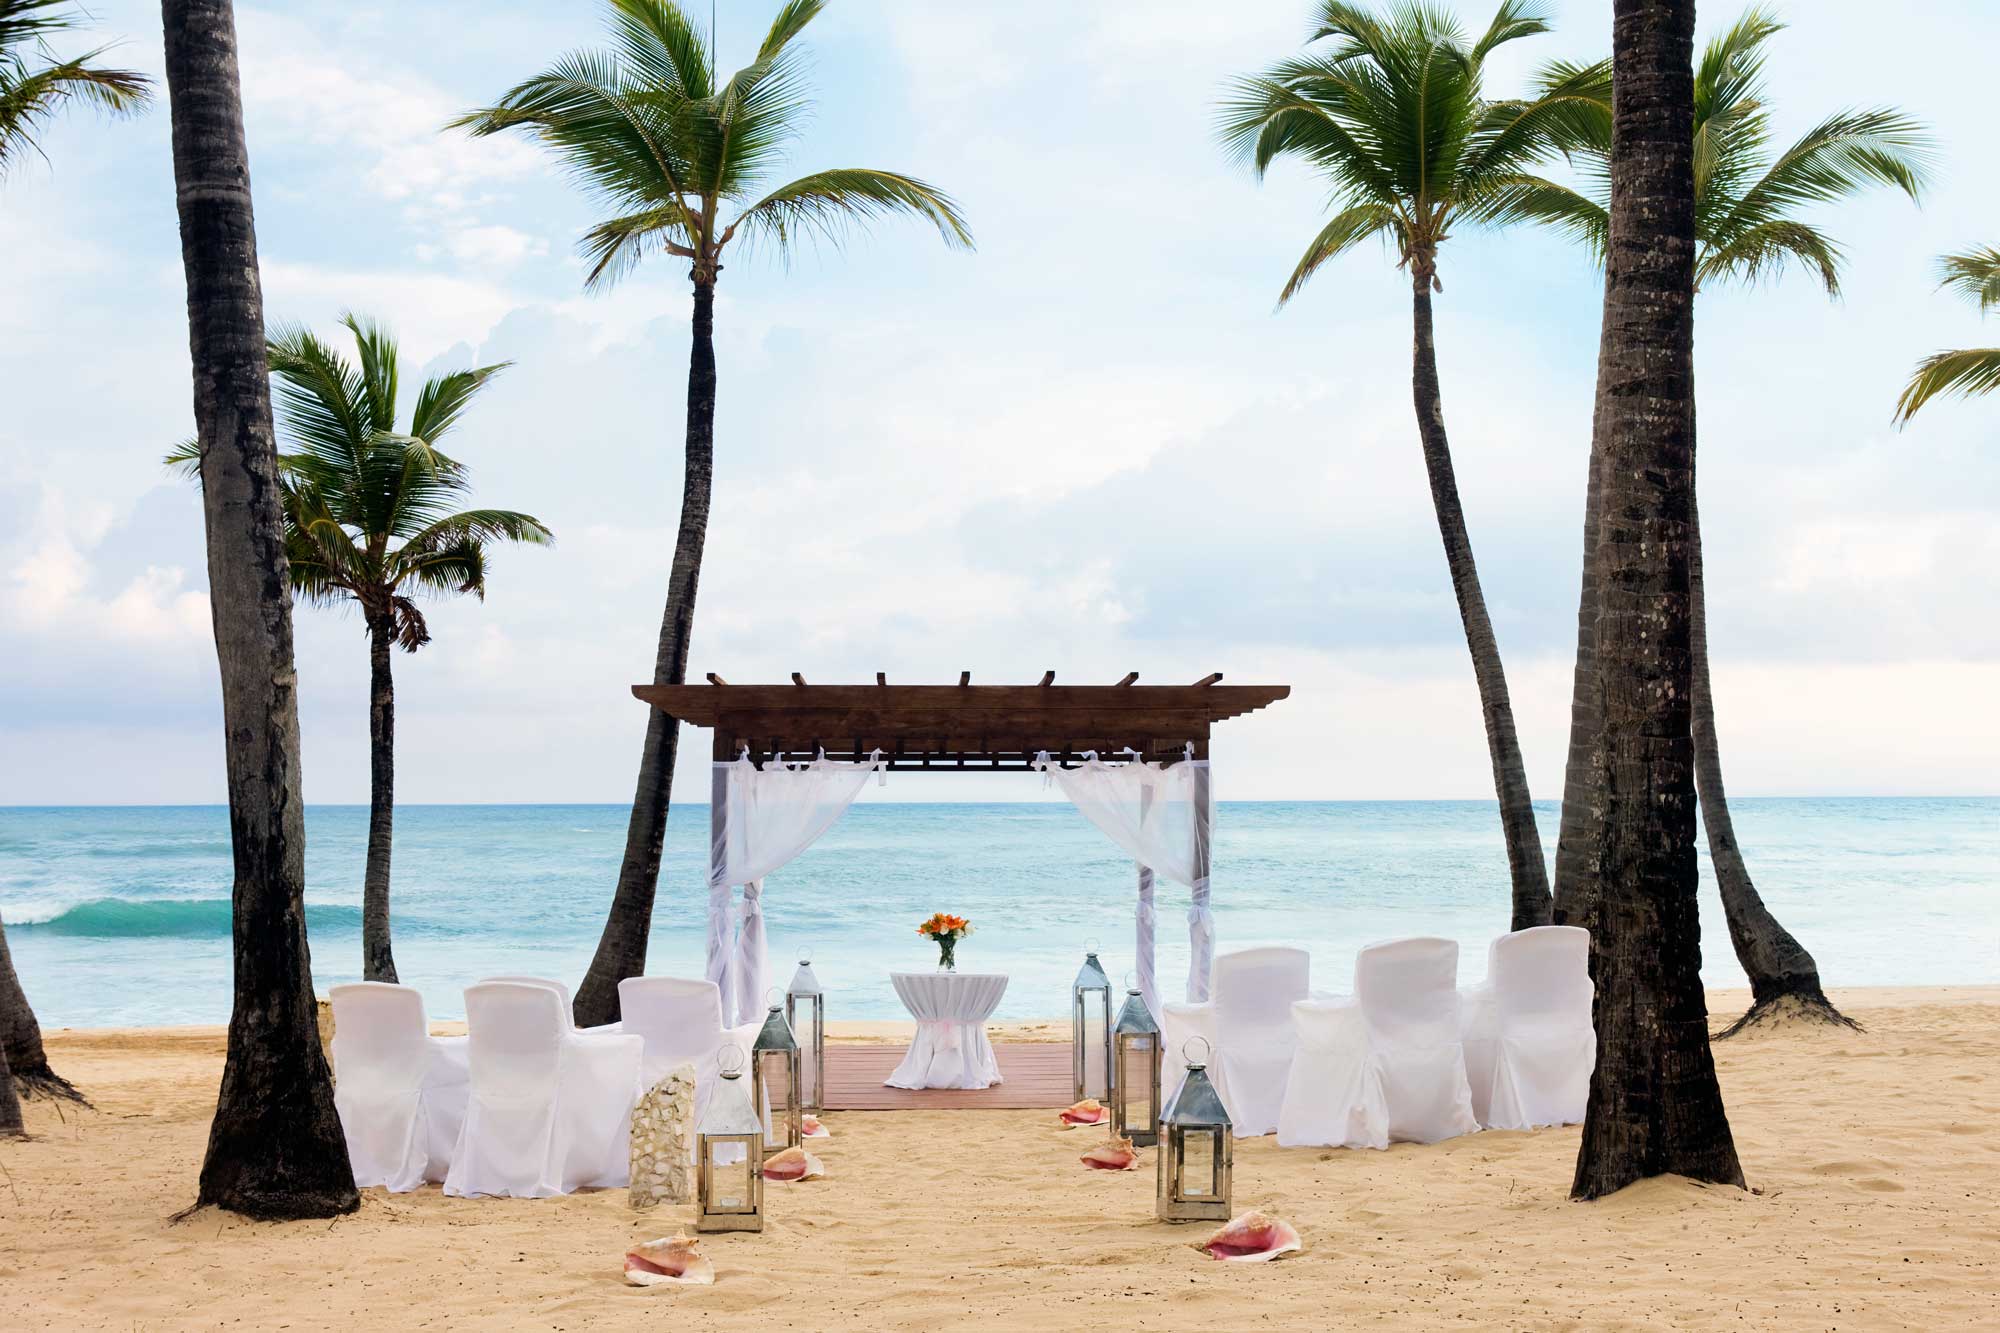 Best All-Inclusive Resorts in the Dominican Republic | All-Inclusive Weddings | All-Inclusive Honeymoons | Excellence Punta Cana